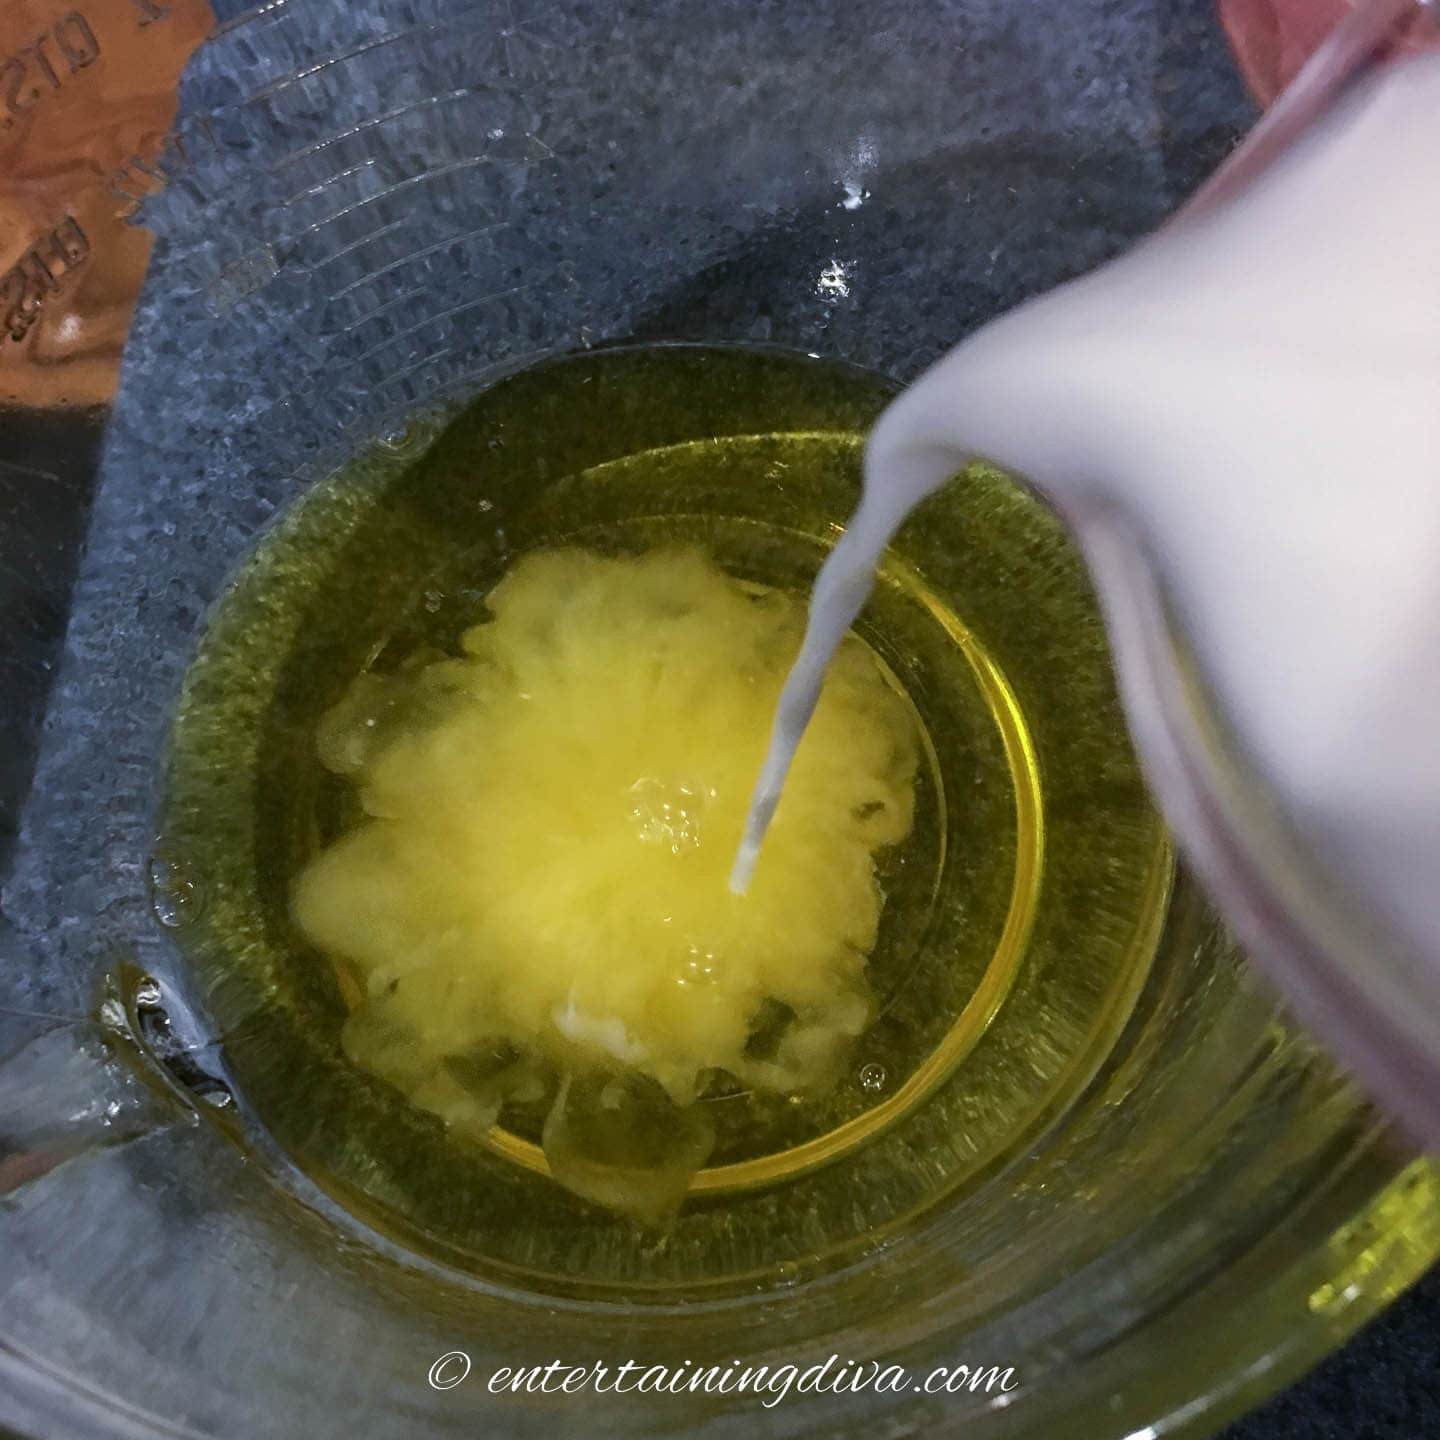 coconut milk and malibu rum being poured into pineapple jello mixture